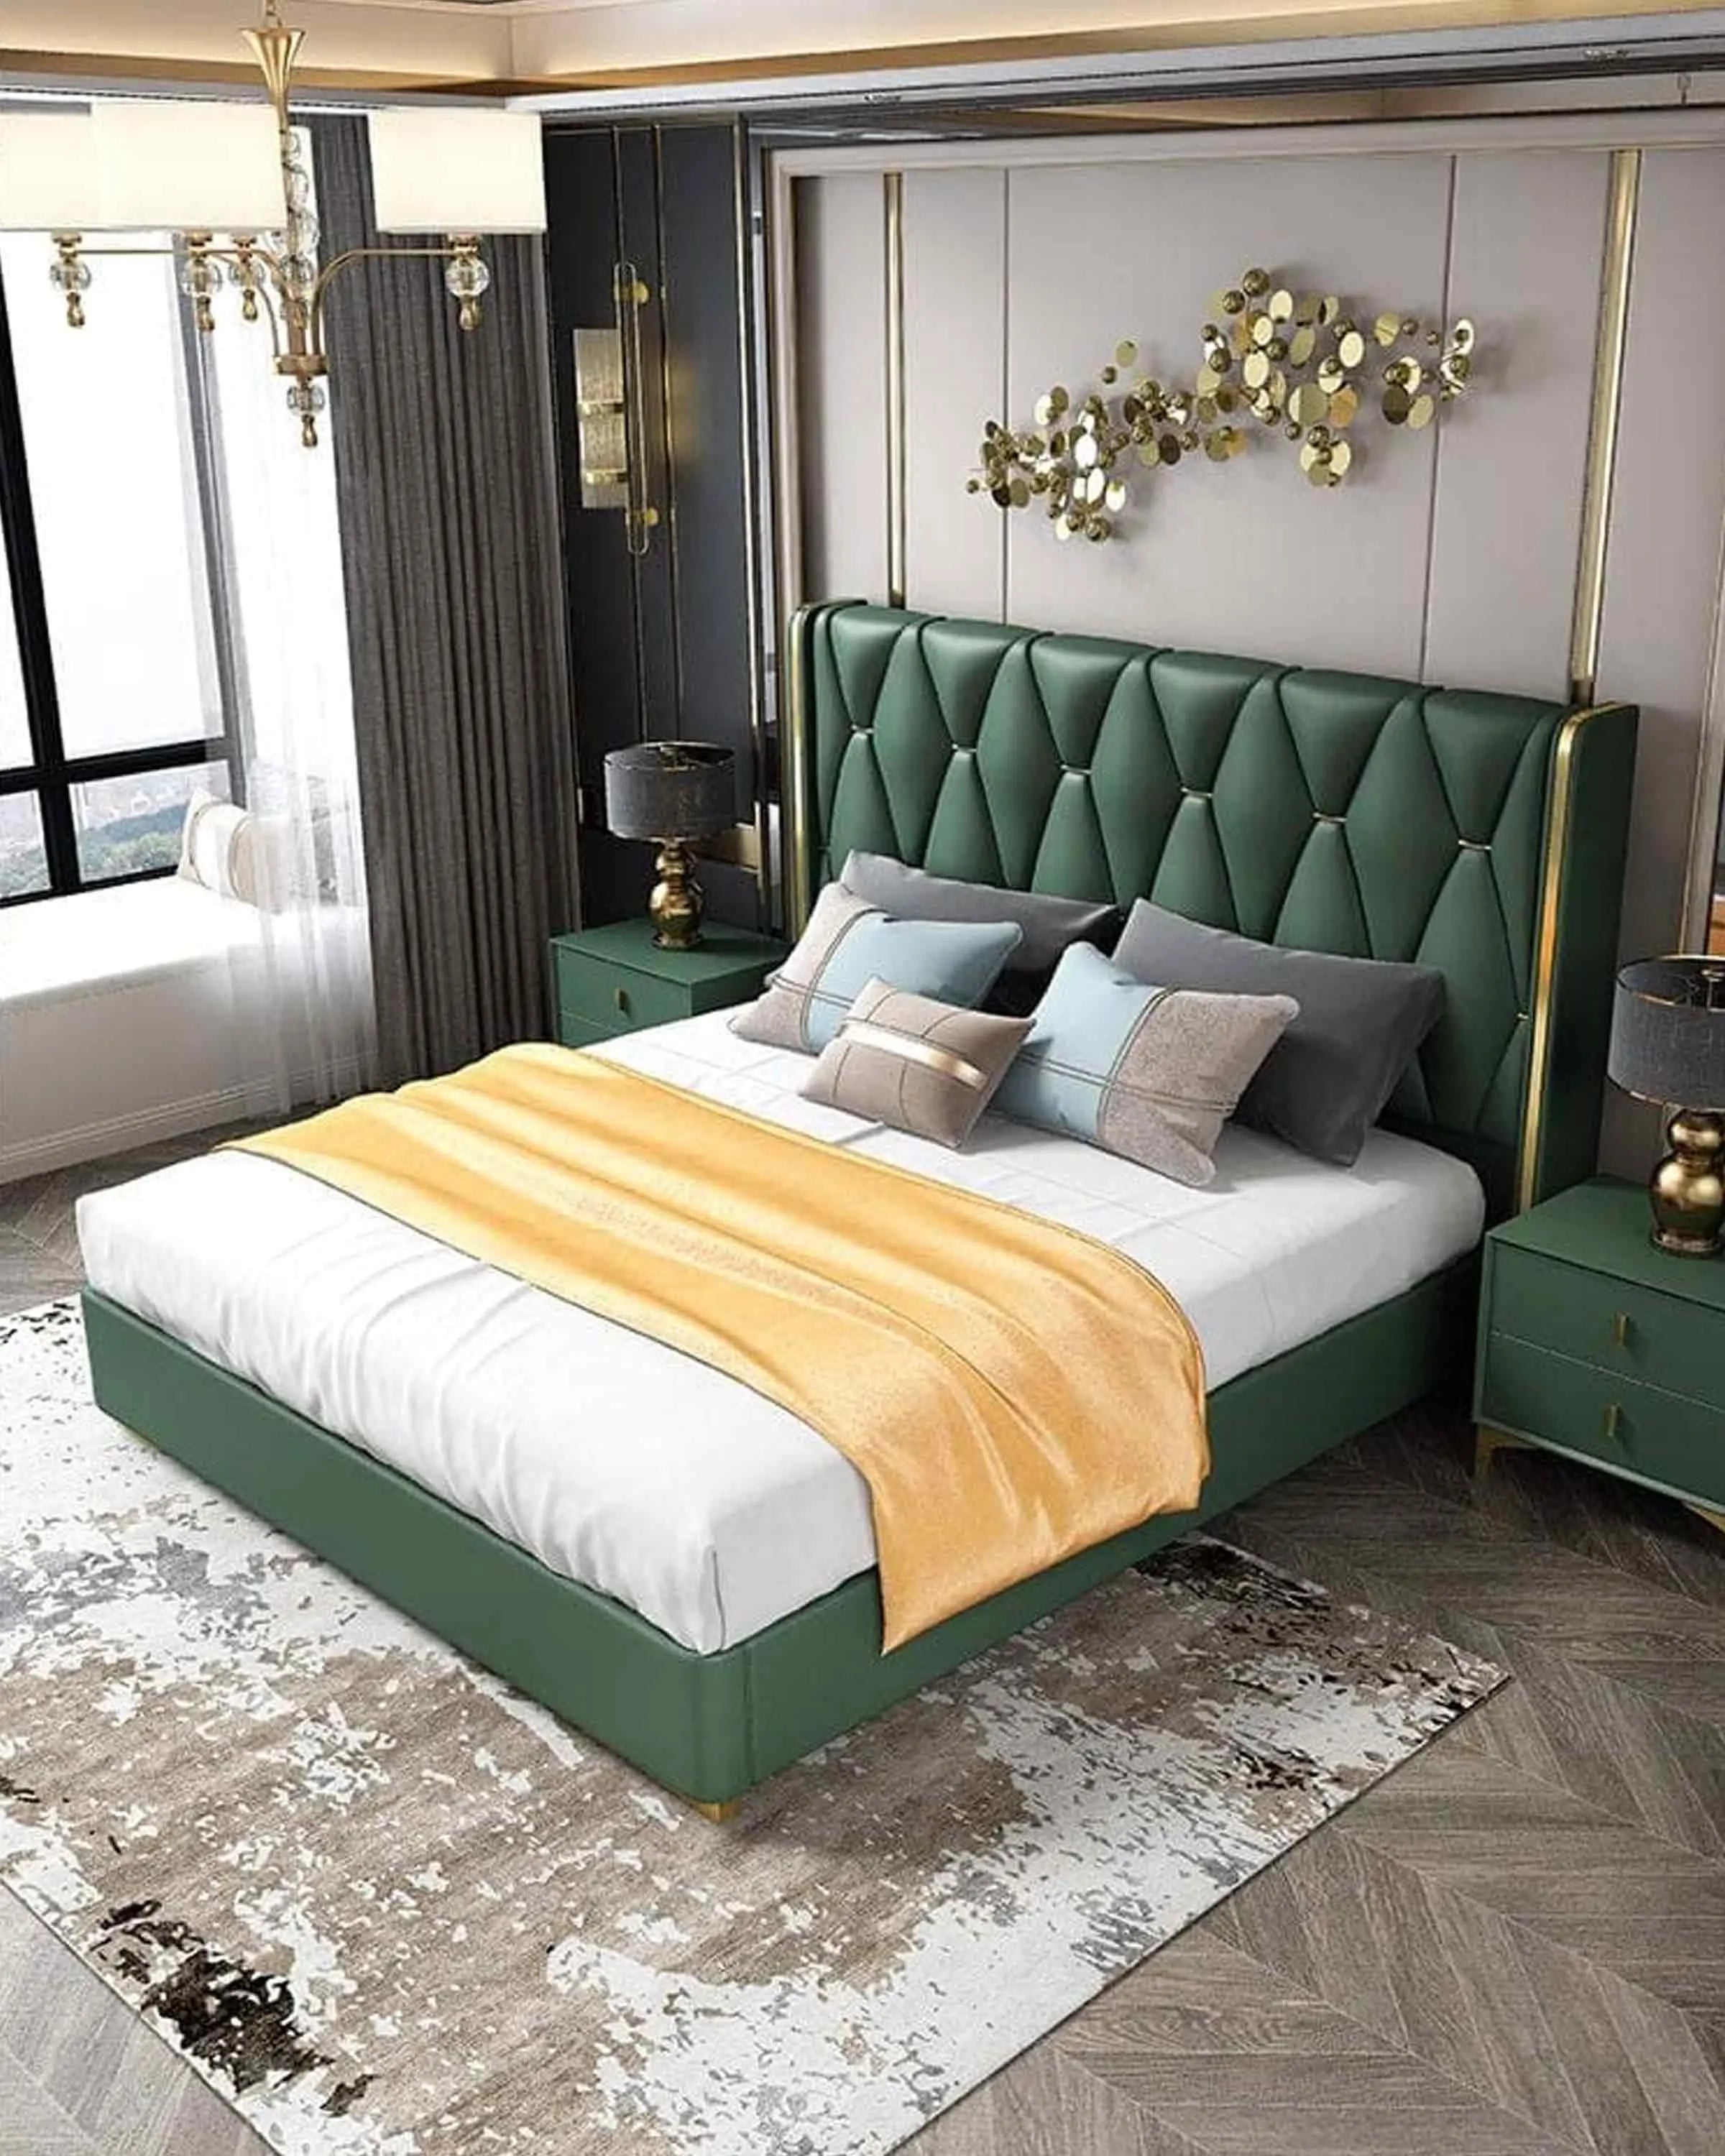 Green Solid Wood Bed with Headboard | king/Queen size bed with storage ANGIE HOMES